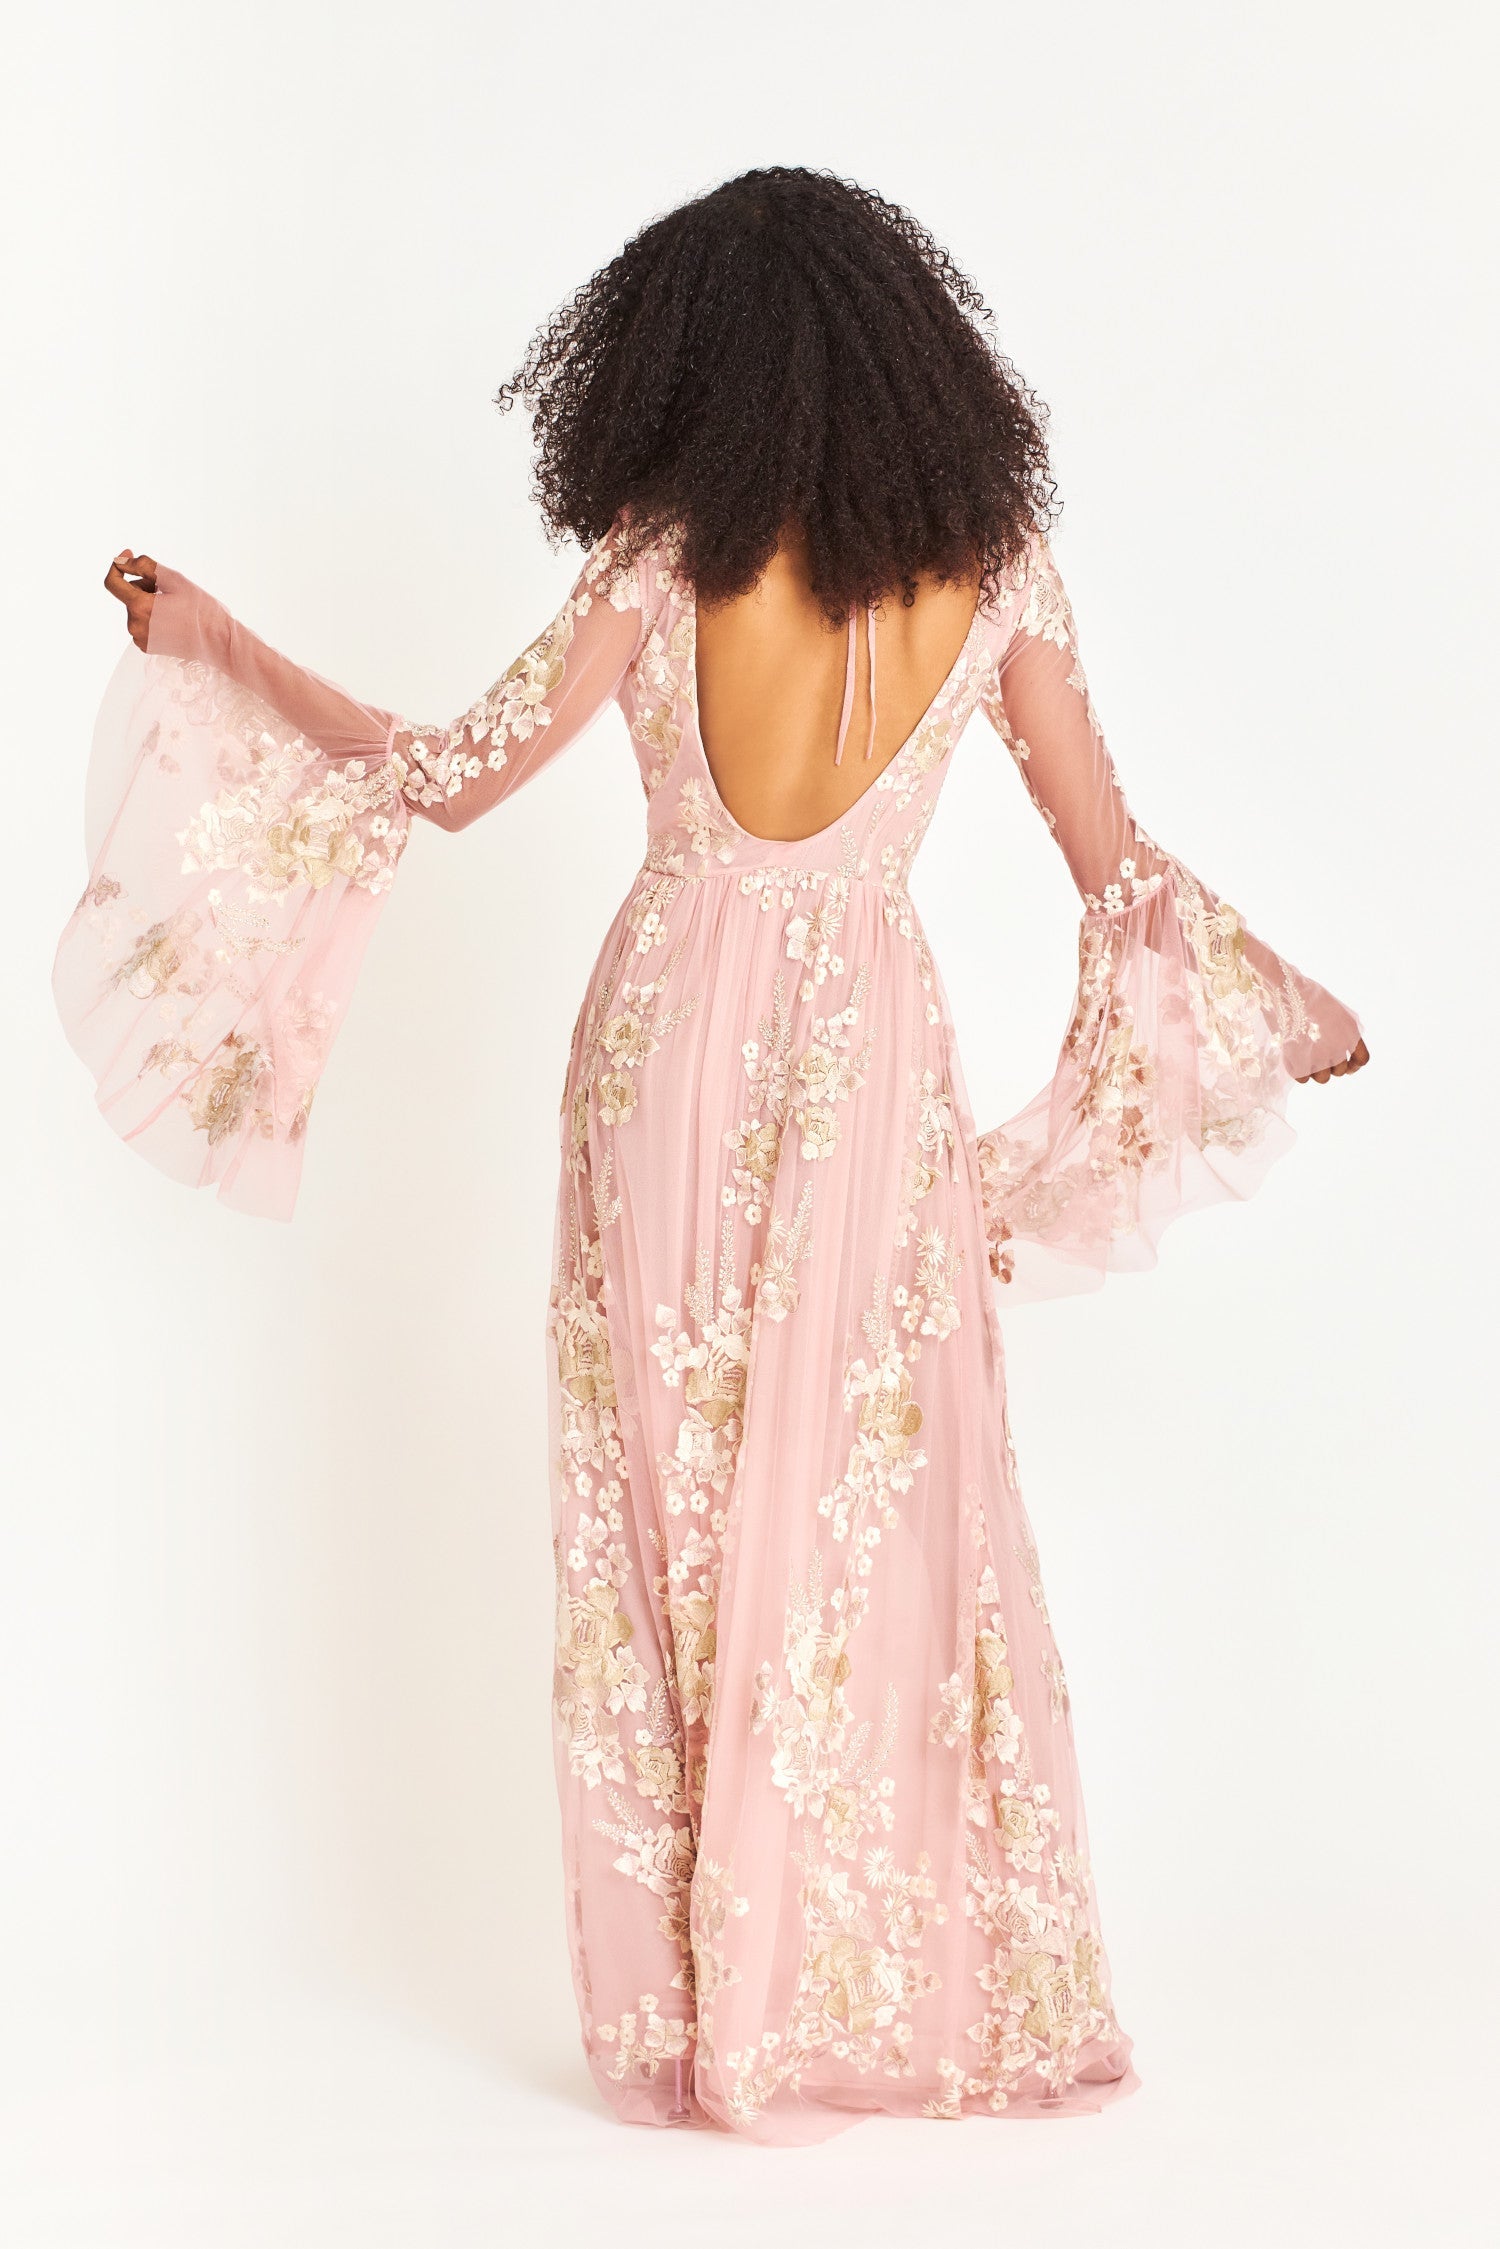 Pink maxi dress features a plunging neckline and high to low bell sleeves with floral applique